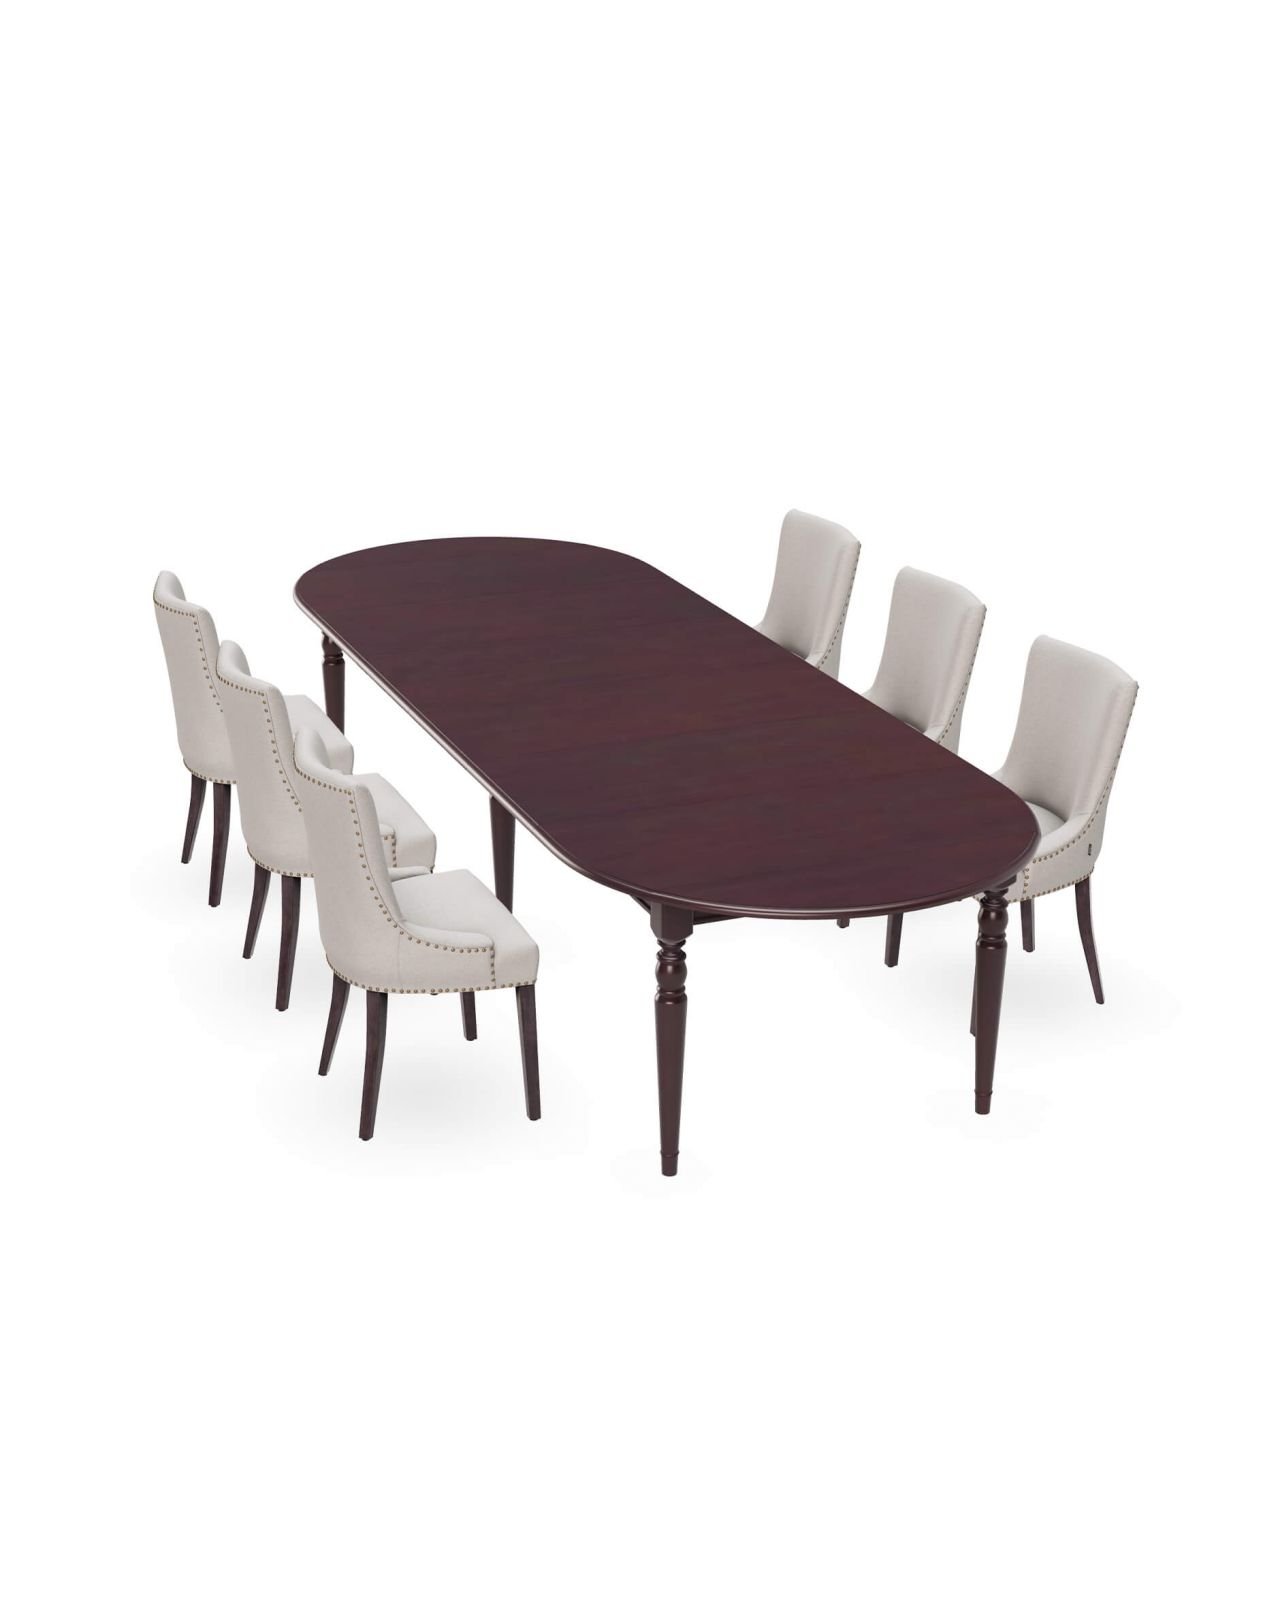 Osterville Dining Table Heritage English With Hudson Dining Chair Sand